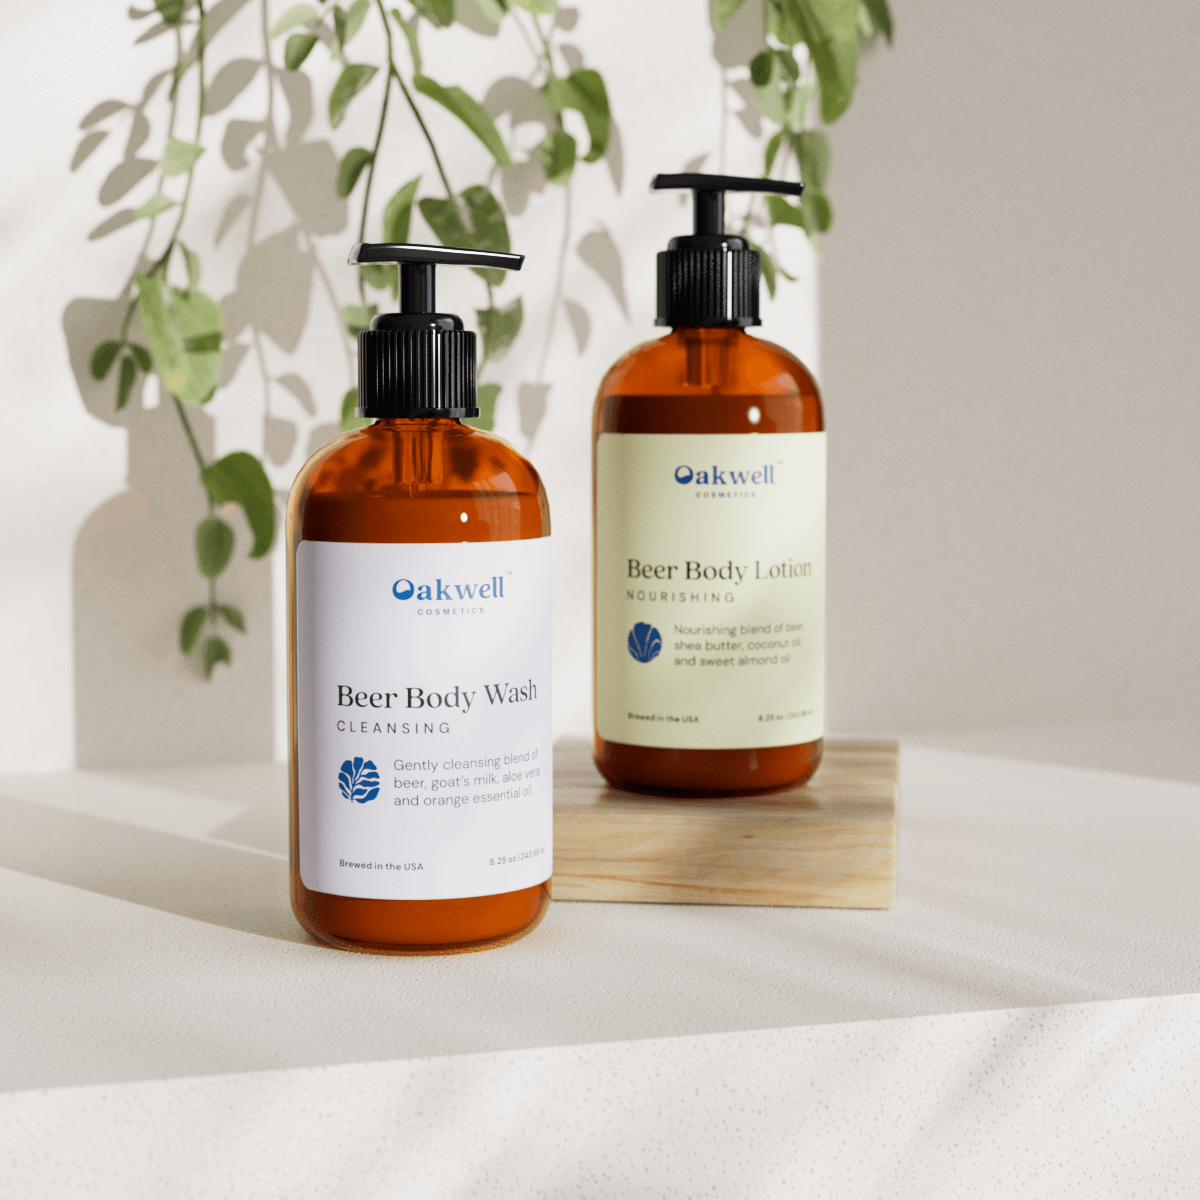 Beer-infused body wash and lotion